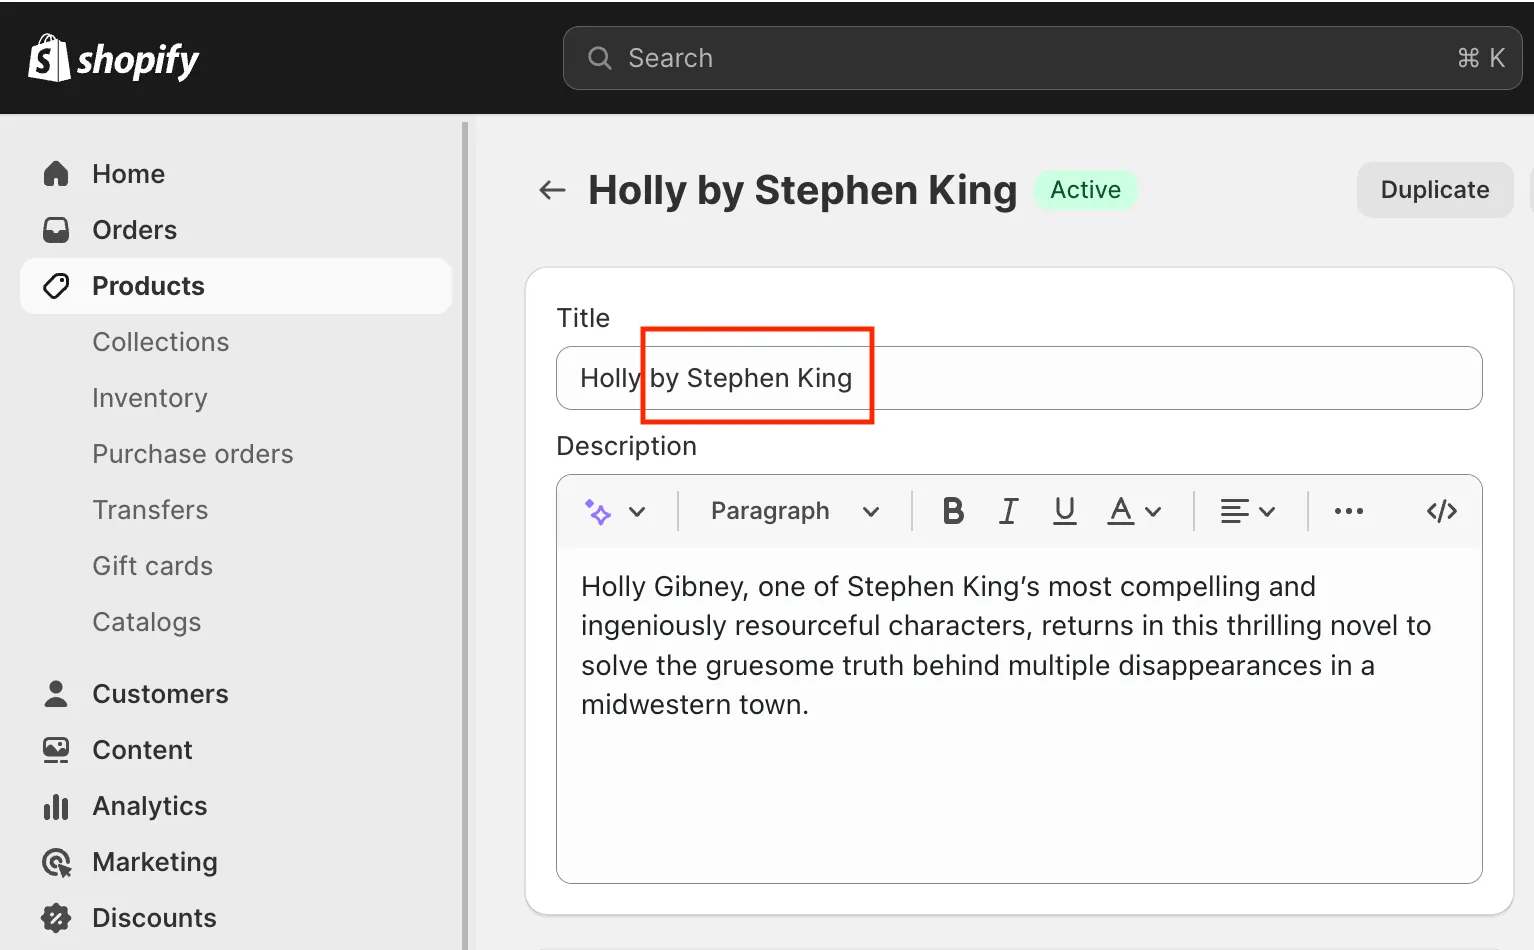 Shopify product form: book author in the title